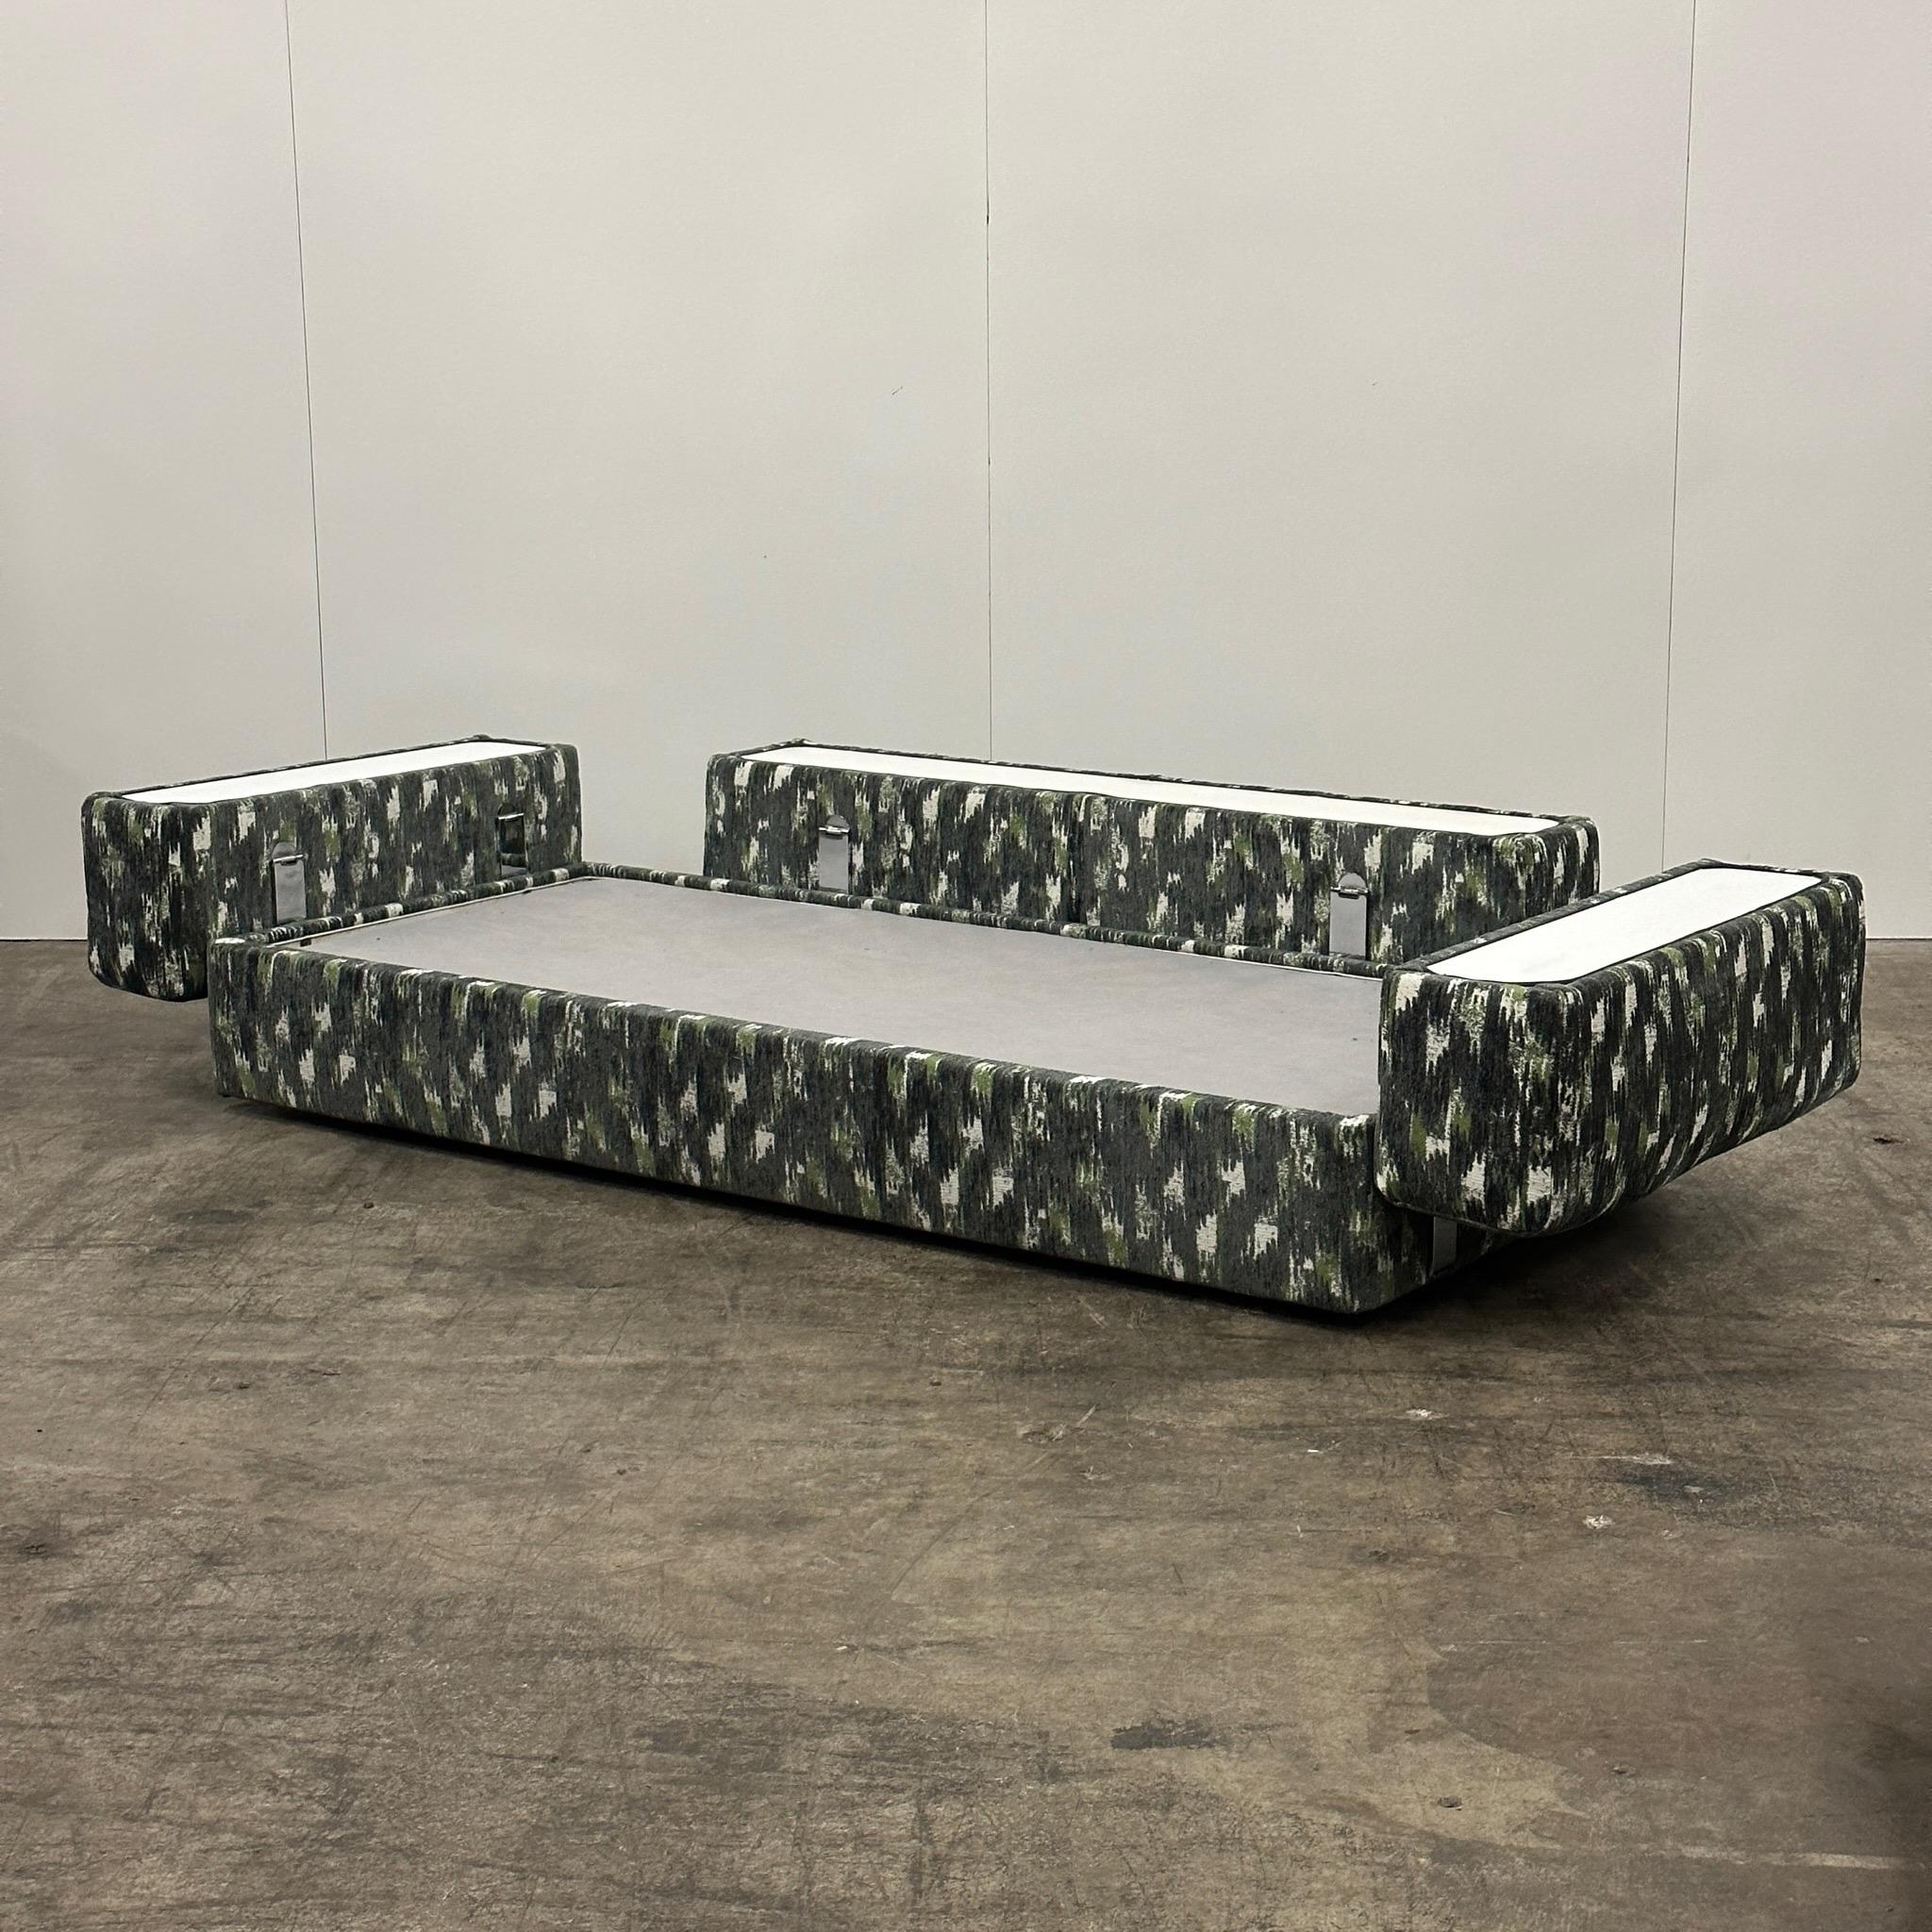 c. 1960s. Imported by Stendig. The 711 daybed by Tito Agnoli, reupholstered in a chenille from Fishman’s fabrics. Classic Italian modern design, with the laminate tables when the bed is transformed.